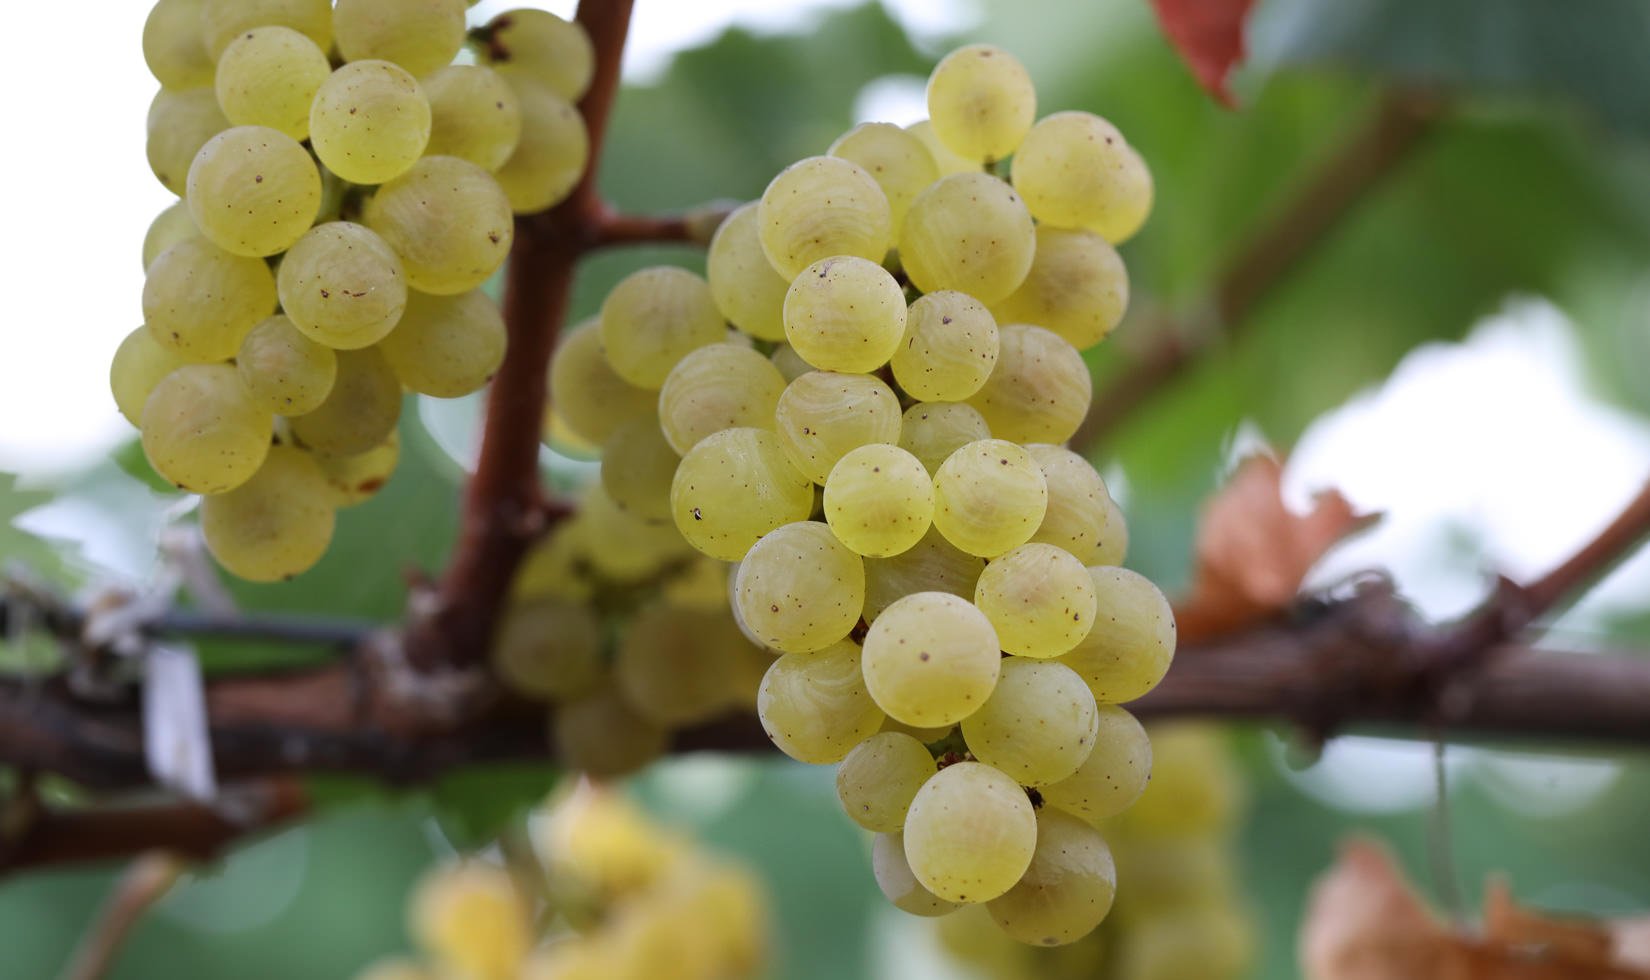 Russian River Valley Chardonnay grape cluster survived 2017 heat wave